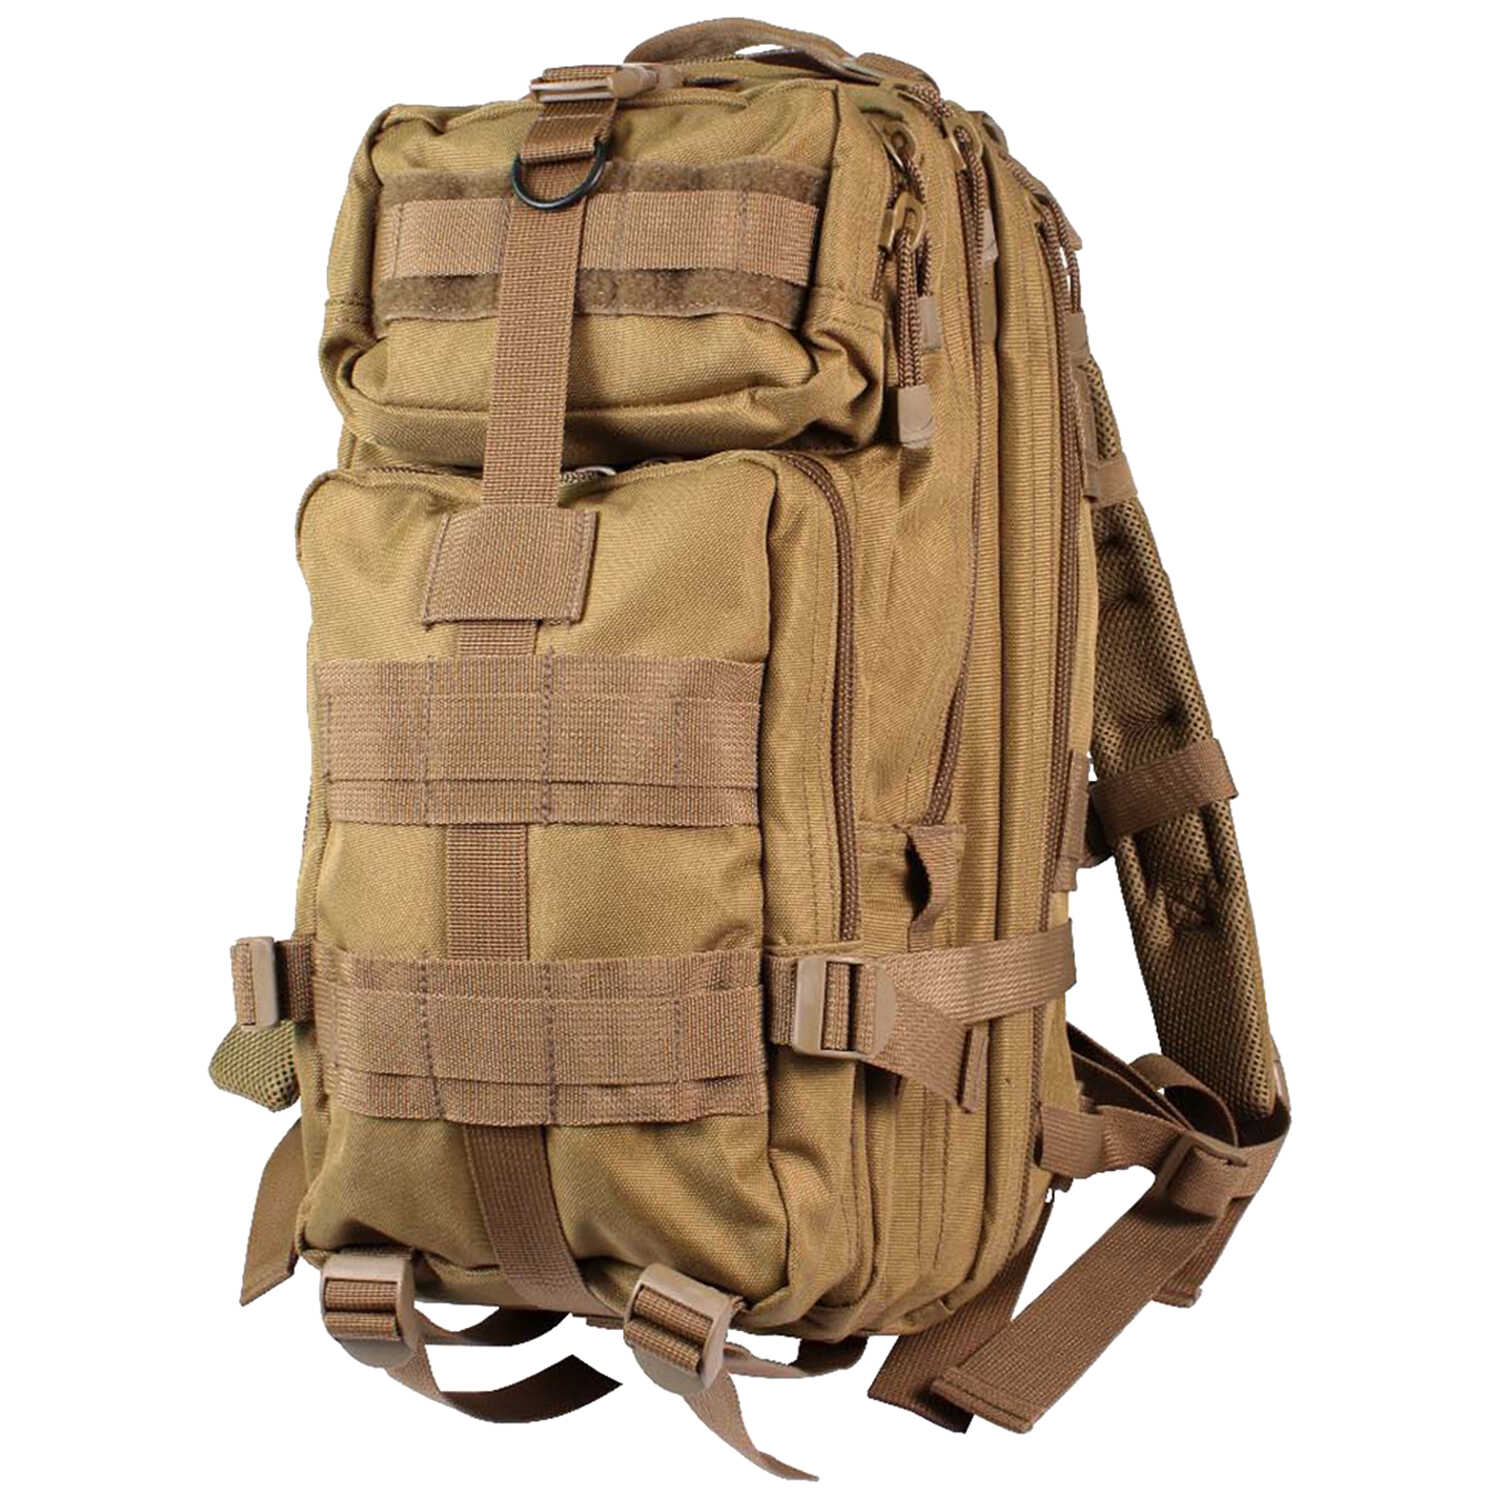 Rothco Tactical MOLLE Bag Coyote Brown & Black Medium Transport Pack Backpack 